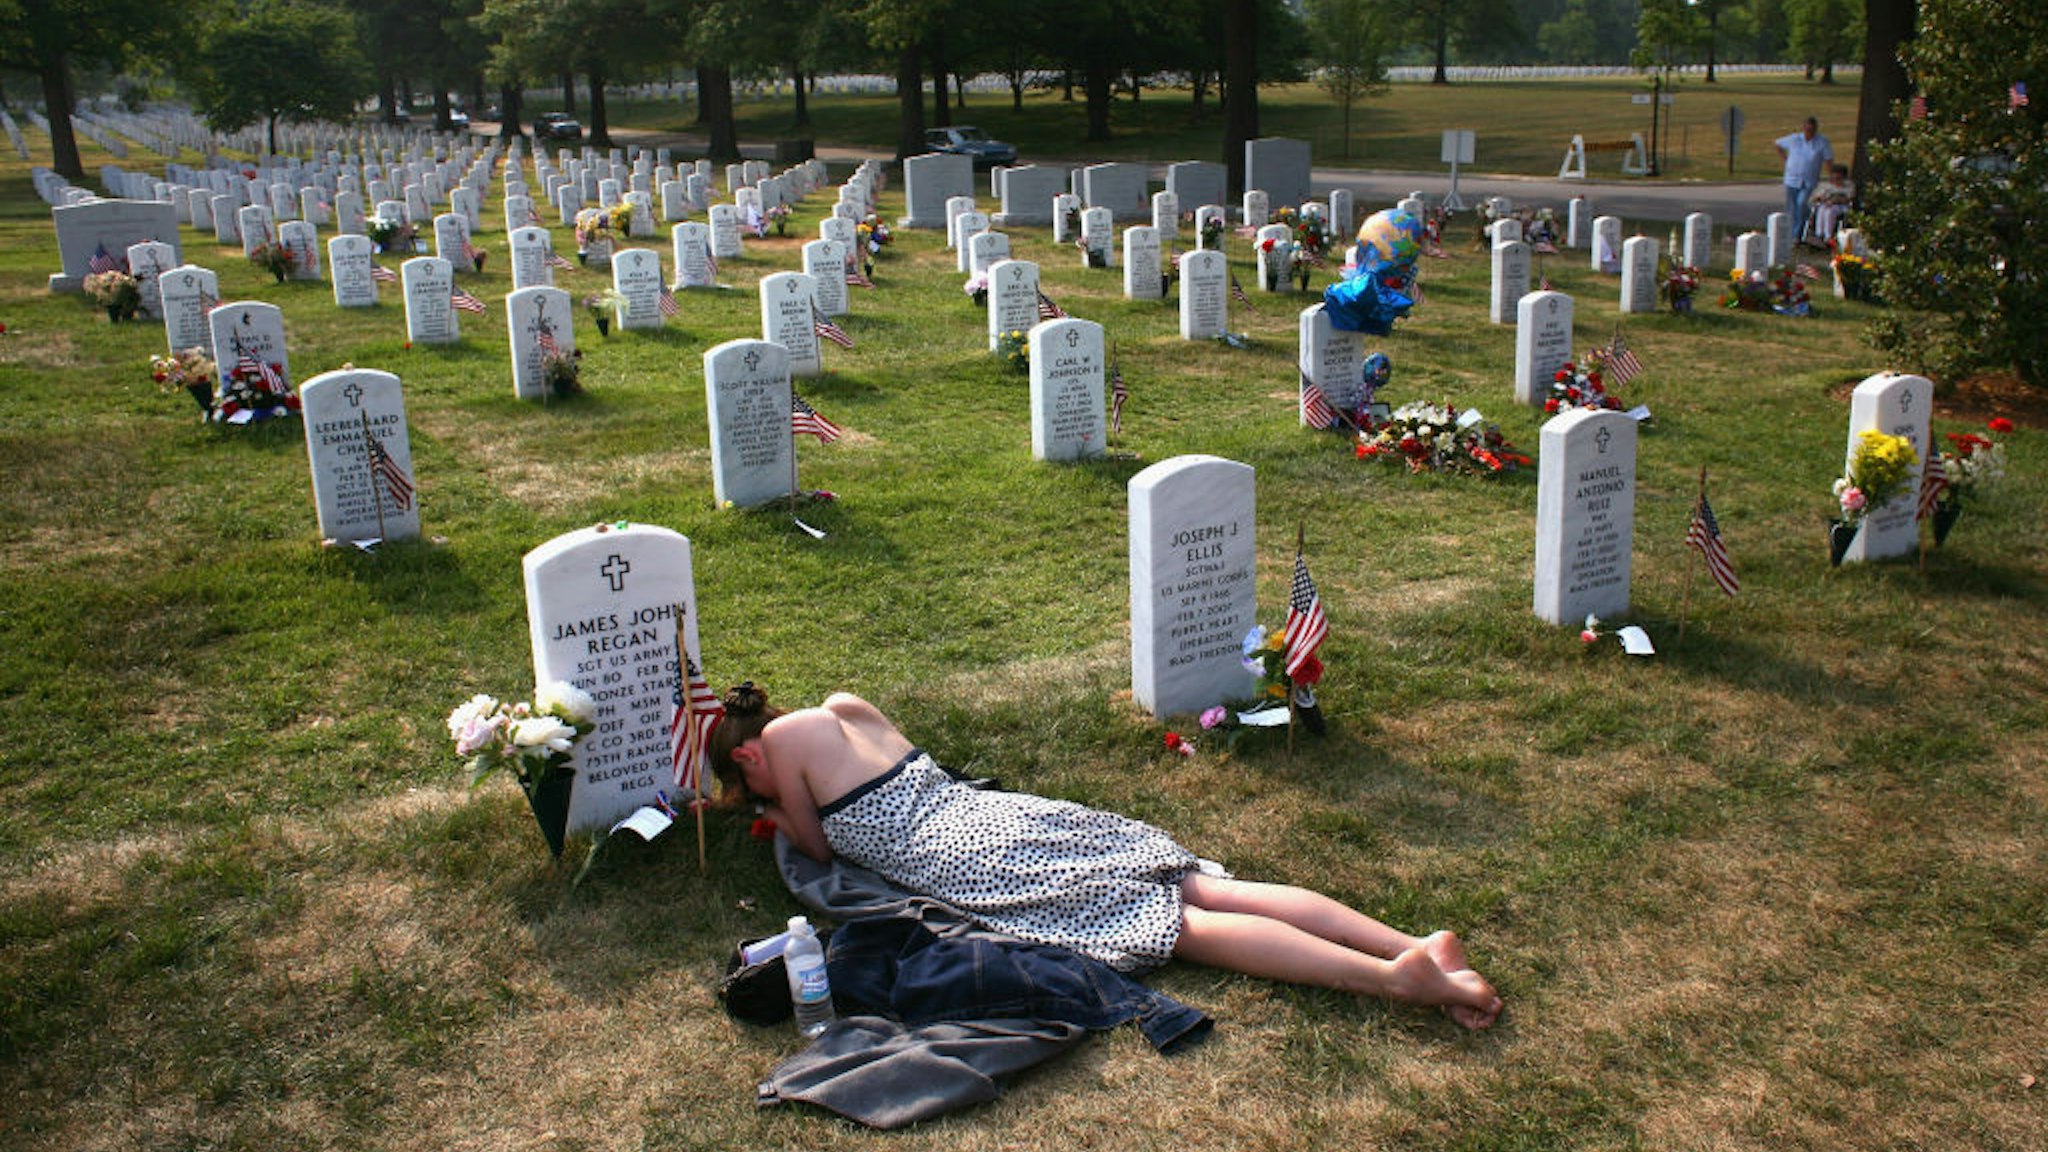 ARLINGTON, VA - MAY 27: Mary McHugh mourns her slain fiance Sgt. James Regan at "Section 60" of the Arlington National Cemetery May 27, 2007. Regan, a US Army Ranger, was killed by an IED explosion in Iraq in February of this year, and this was the first time McHugh had visited the grave since the funeral. Section 60, the newest portion of the vast national cemetery on the outskirts of Washington D.C, contains hundreds of U.S. soldiers killed in Iraq and Afghanistan. Family members of slain American soldiers have flown in from across the country for Memorial Day. (Photo by John Moore/Getty Images)